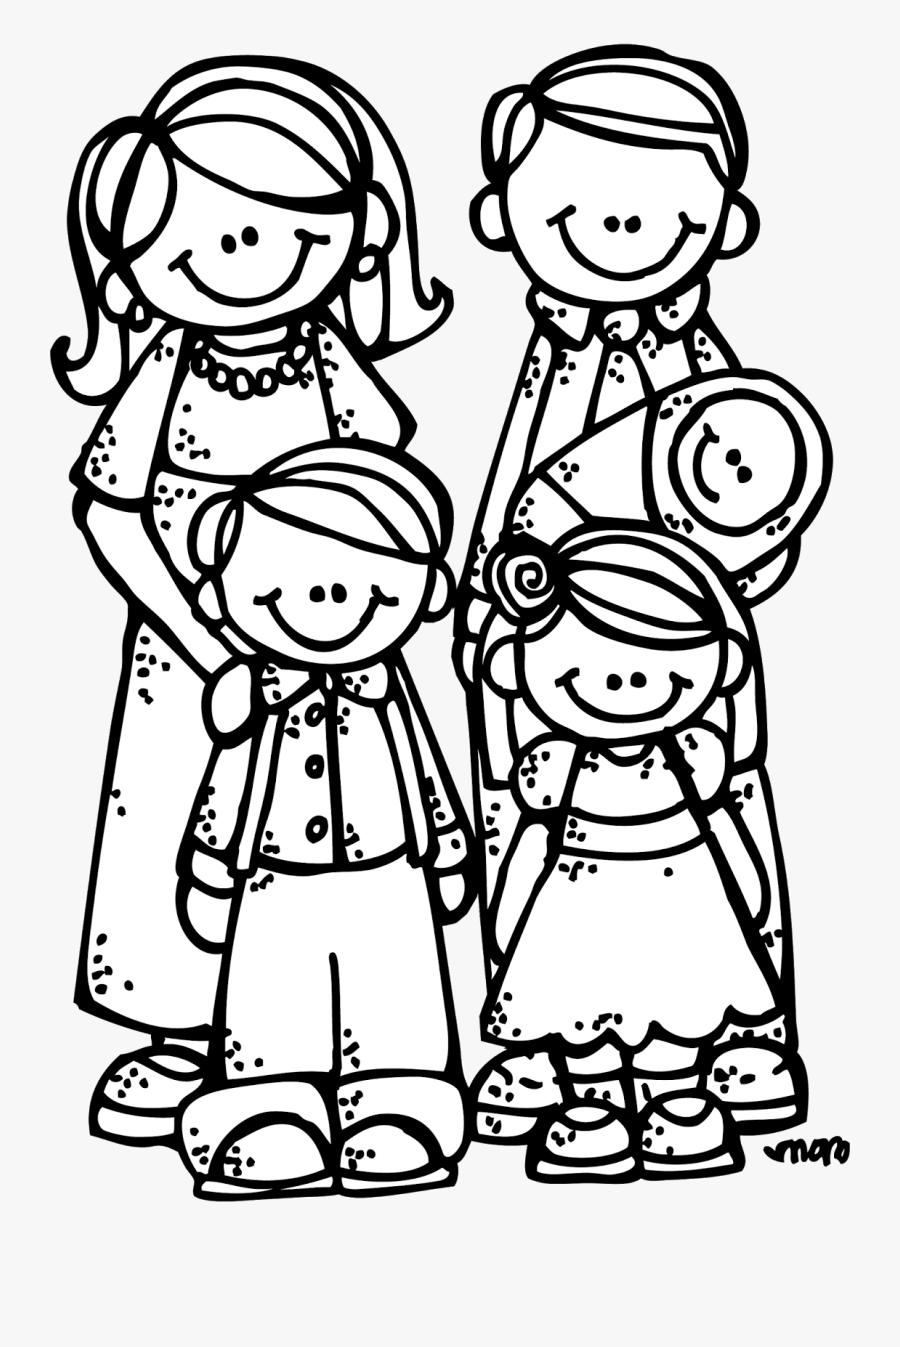 Image Of Family Clipart Black And White - Black And White Family Clip Art, Transparent Clipart